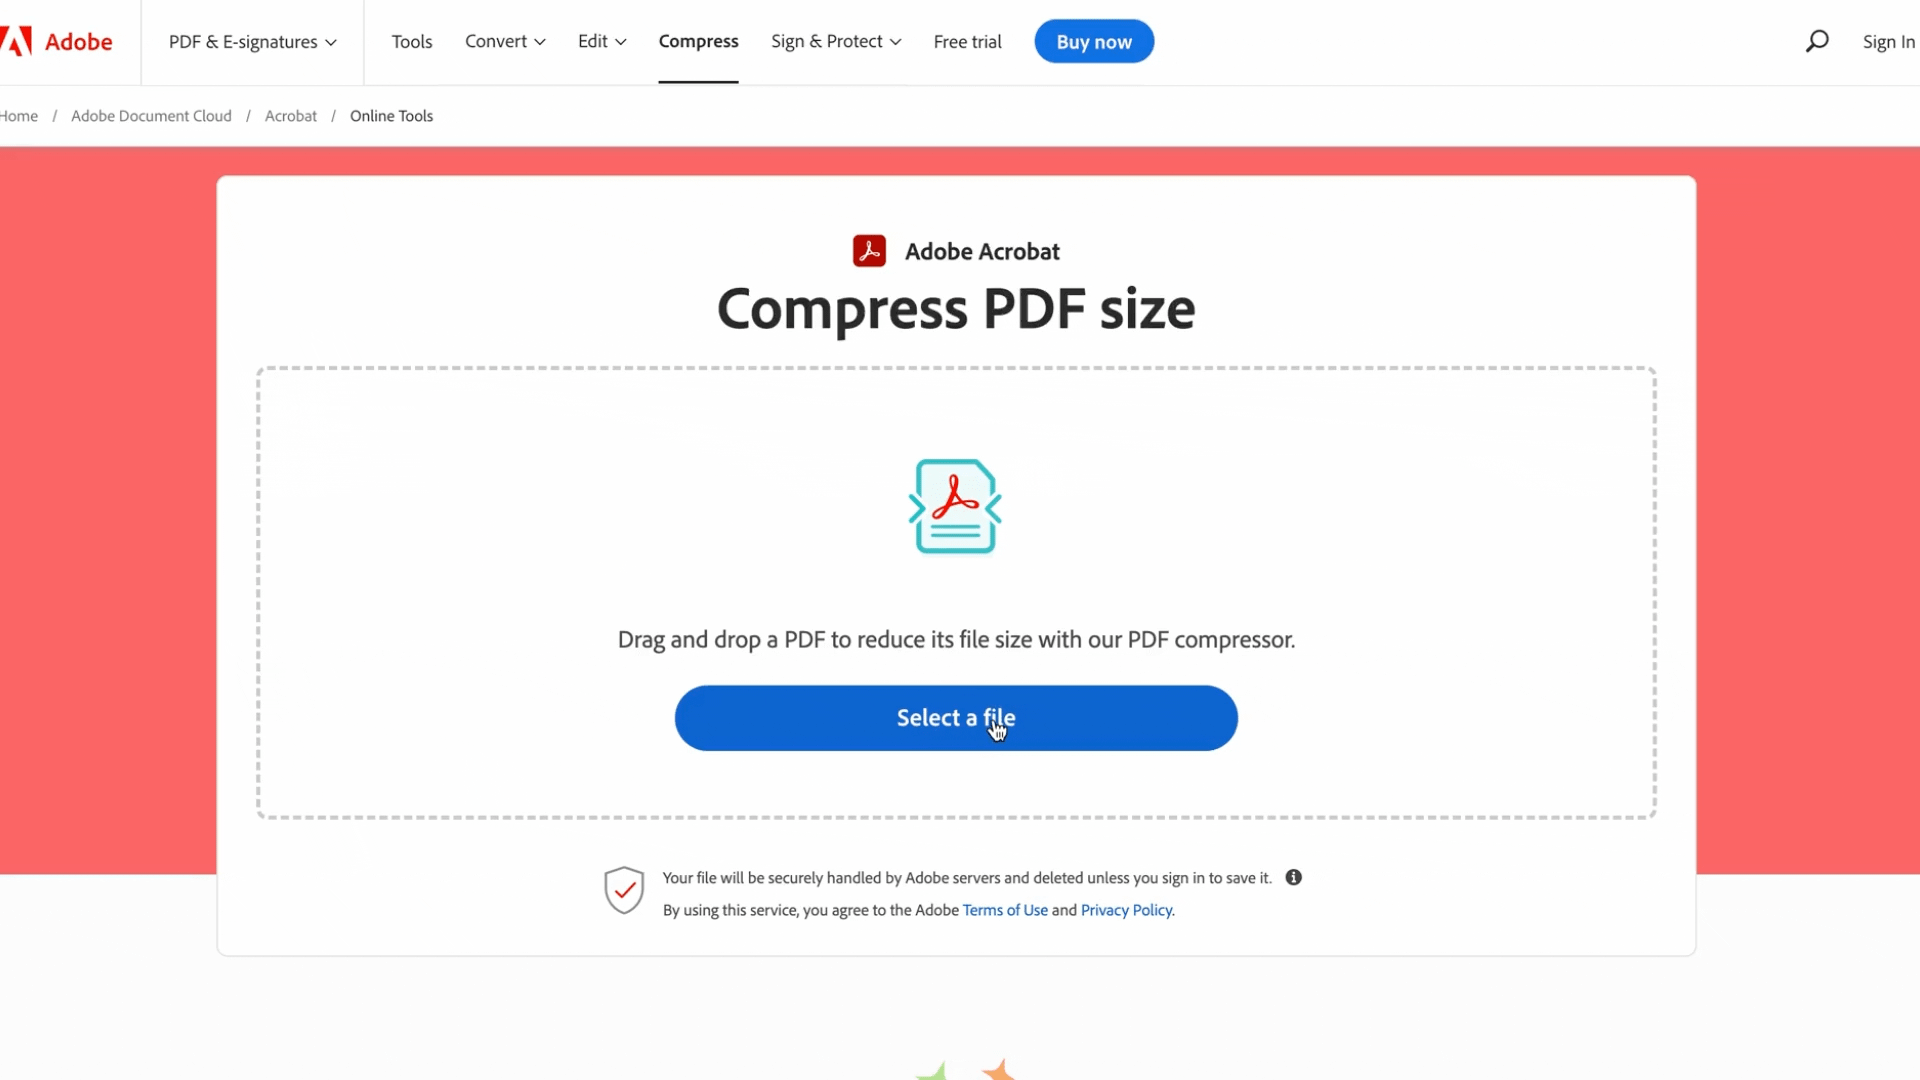 A GIF of using Adobe Acrobat's PDF compressor (uploading a file, compressing it, and downloading)